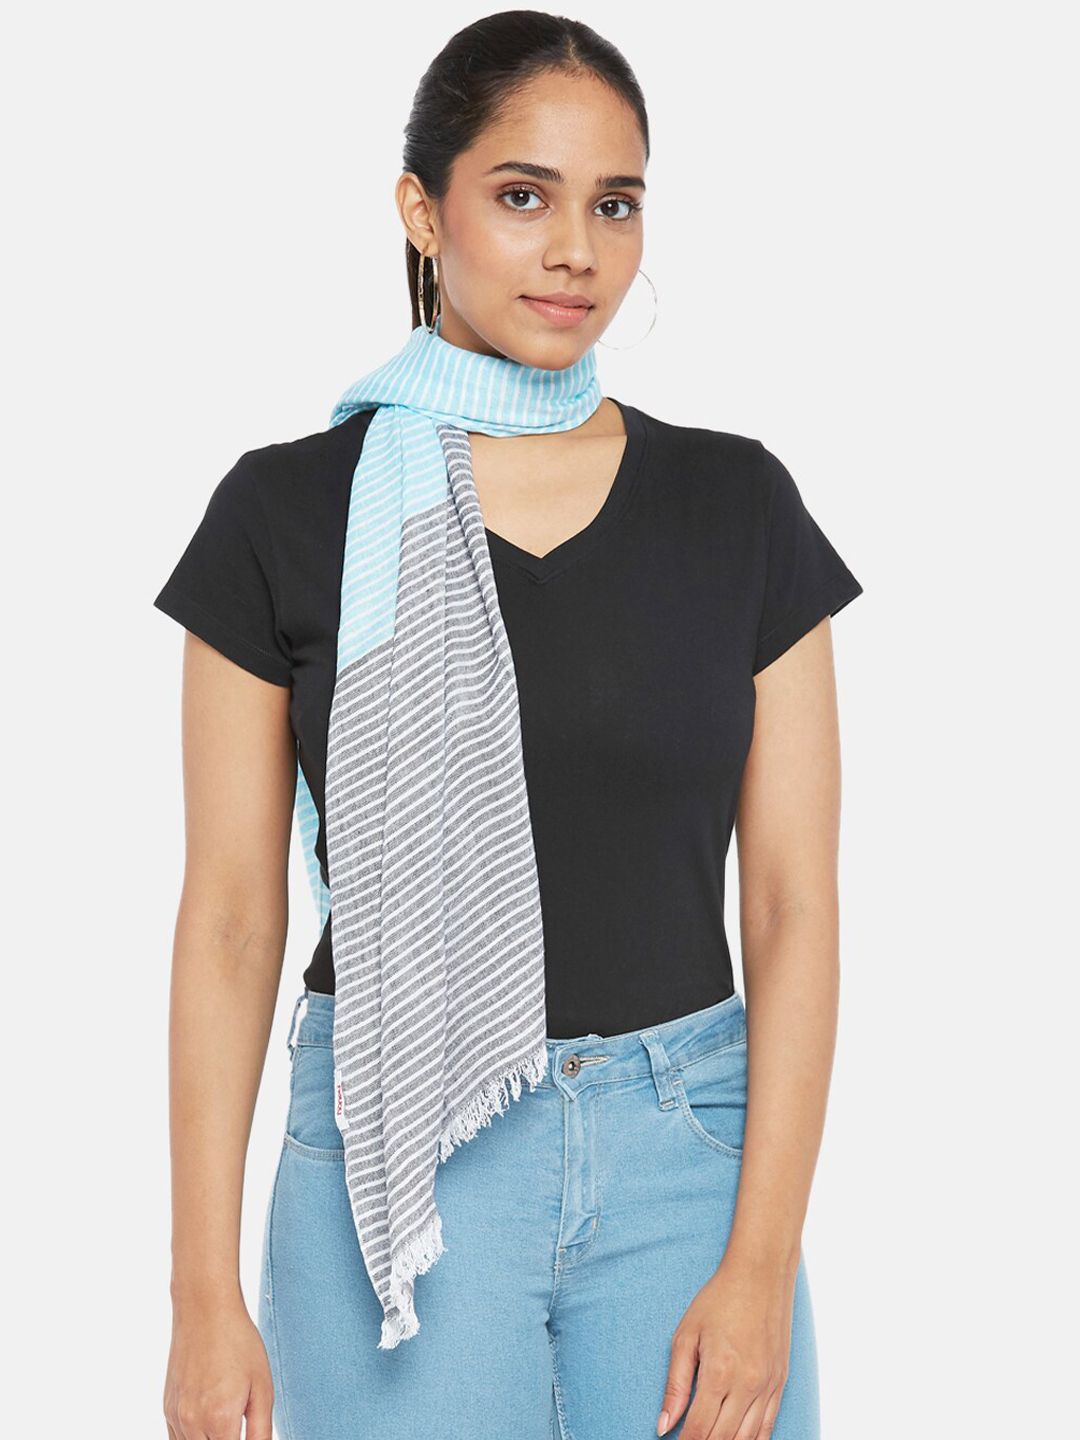 Honey by Pantaloons Women Blue & Grey Striped Scarf Price in India